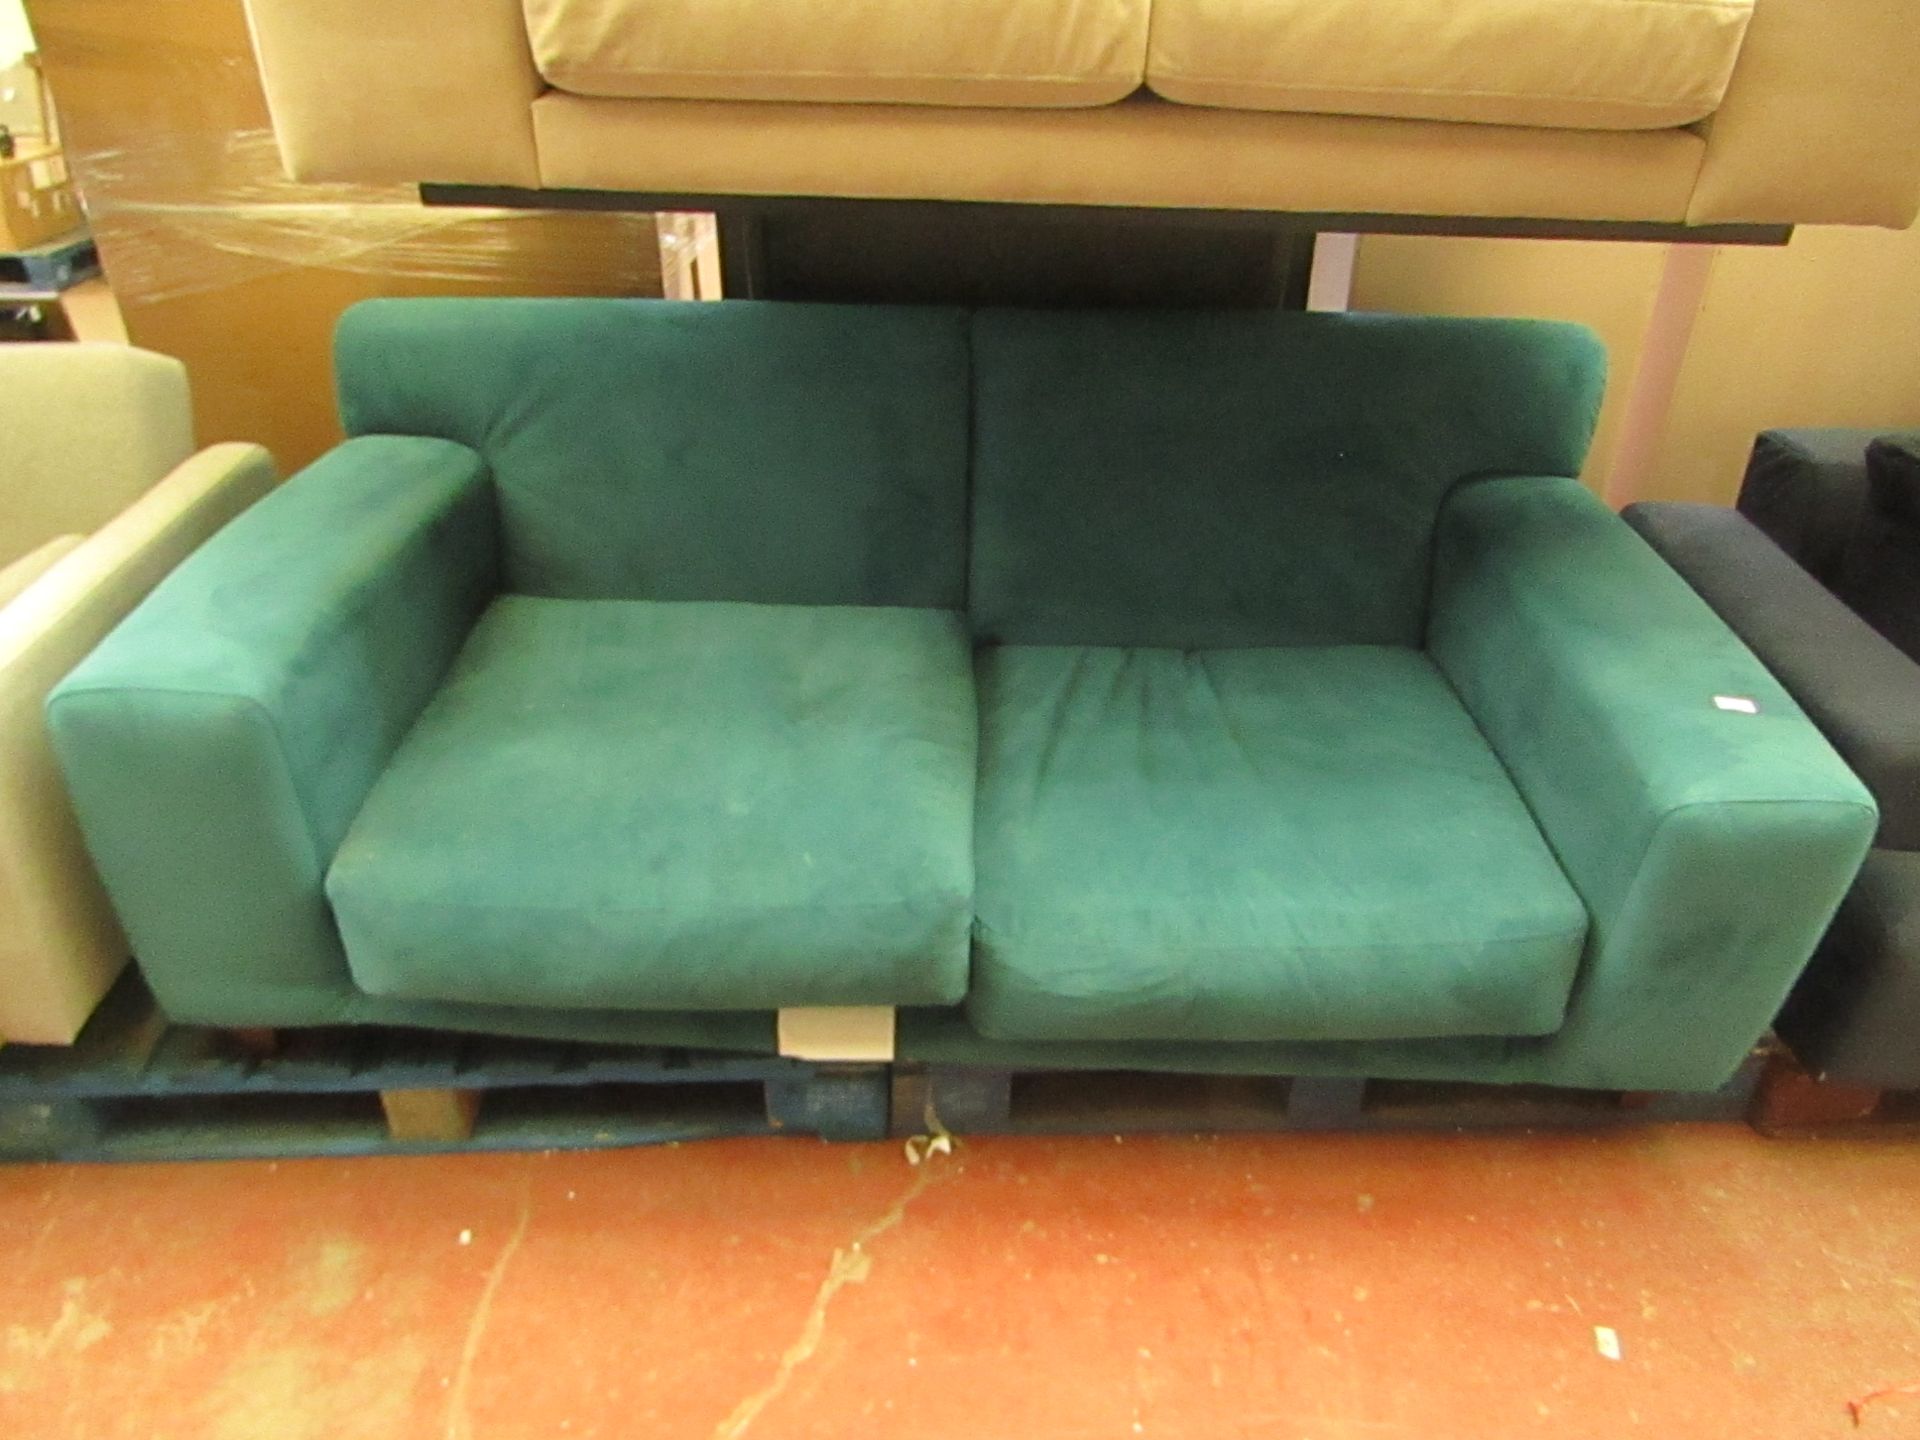 | 1X | MADE.COM 2 SEATER SOFA | TEAL BLUE | GOOD CONDITION BUT NO FEET | RRP £- |